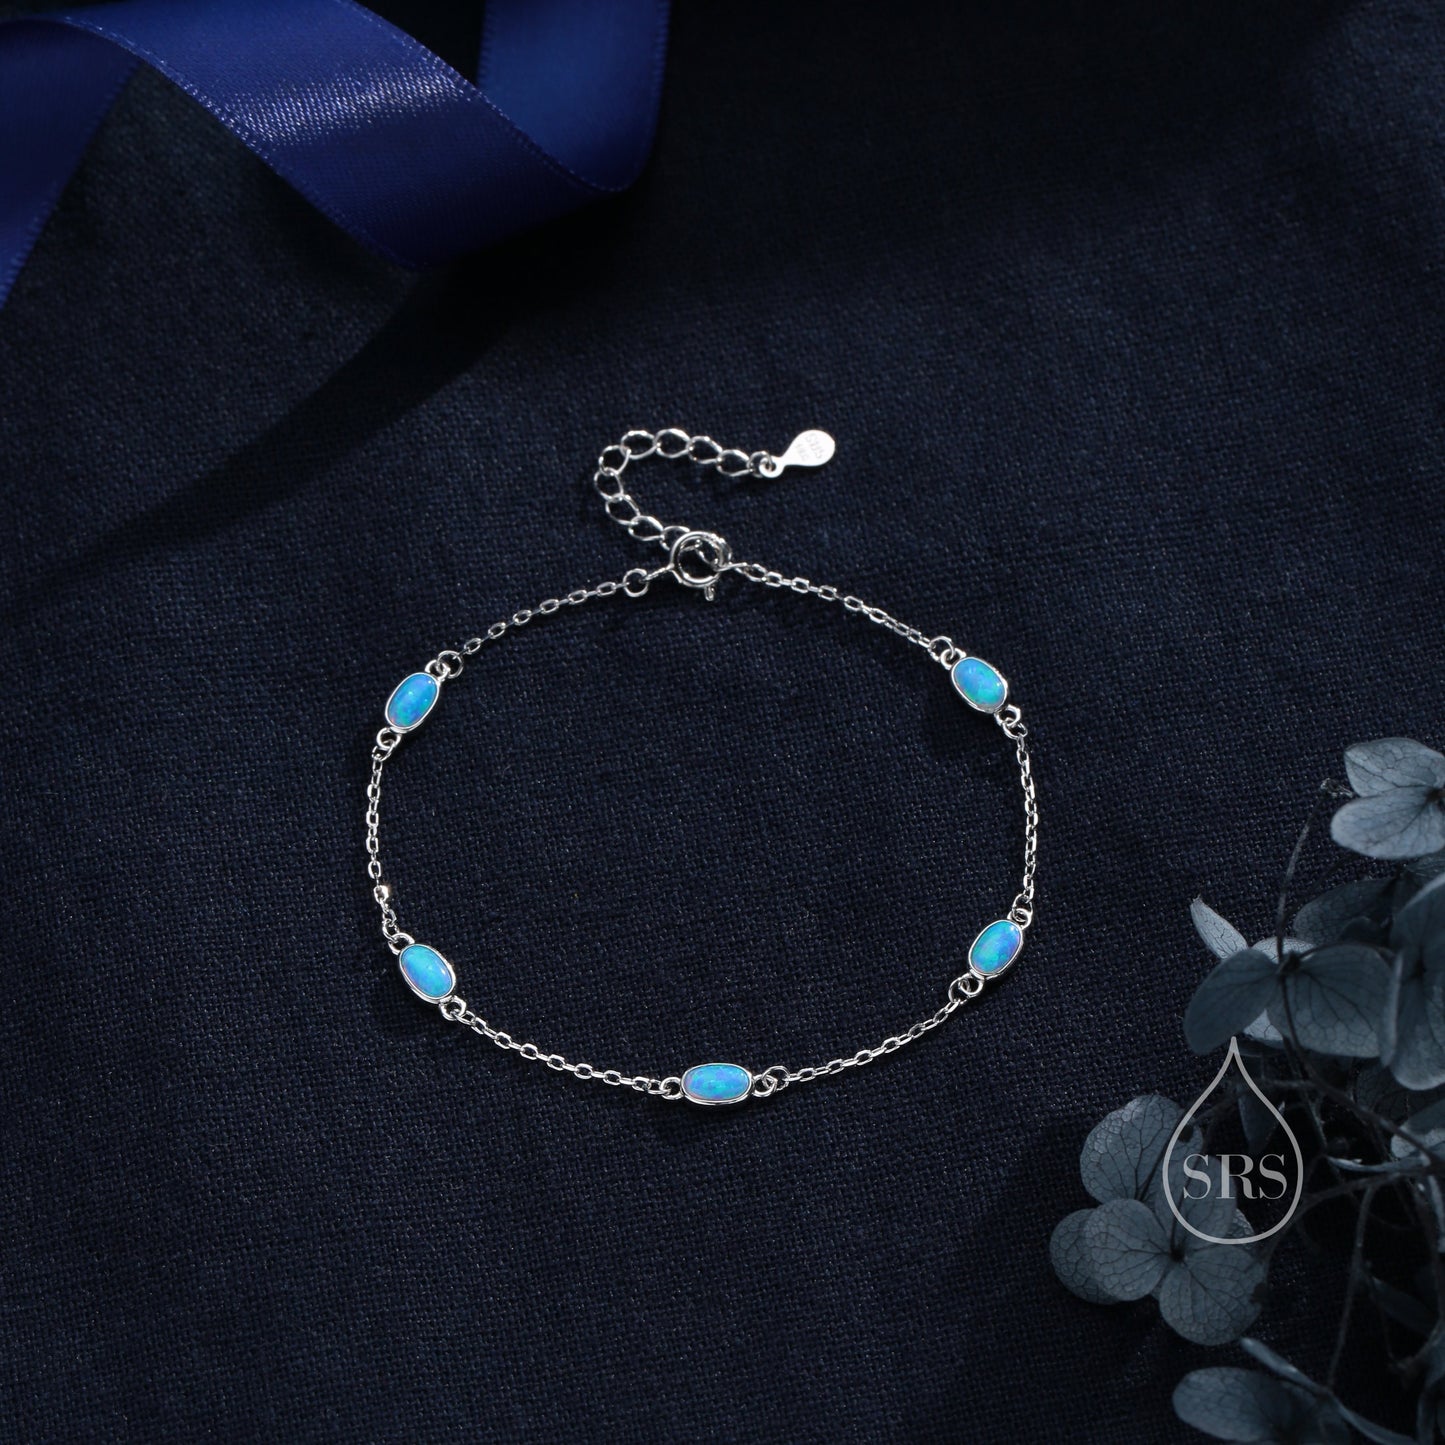 Delicate Blue Opal Oval Satellite Bracelet in Sterling Silver, Silver or Gold, Simulated Blue Opal Bracelet, Oval Opal Motif Bracelet